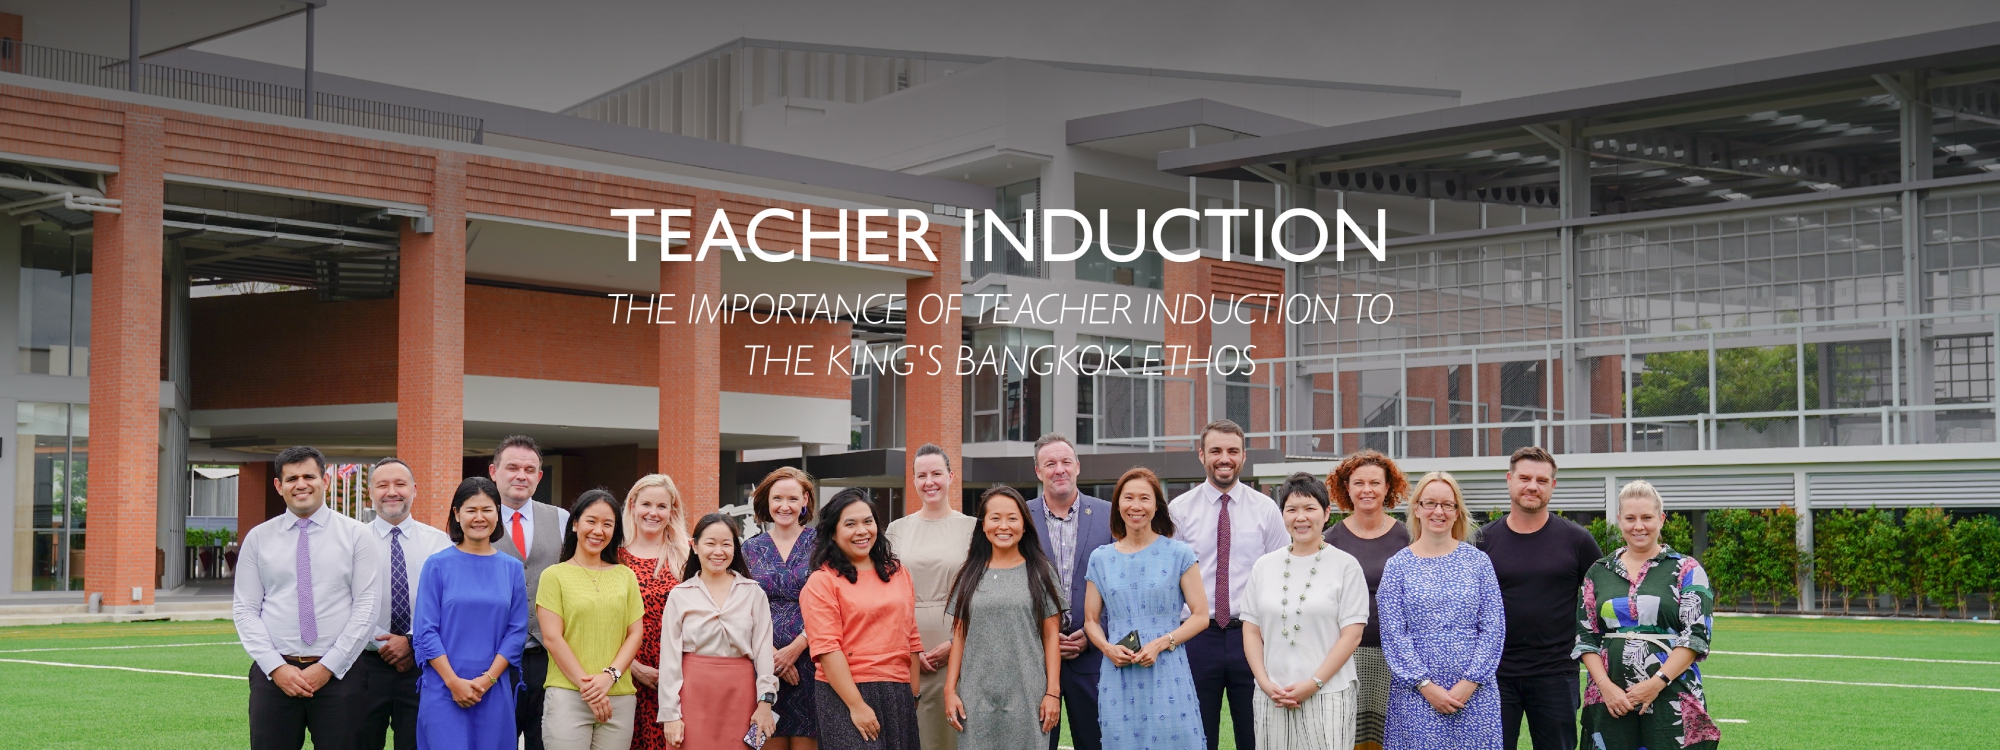 The importance of teacher induction to the King's Bangkok ethos